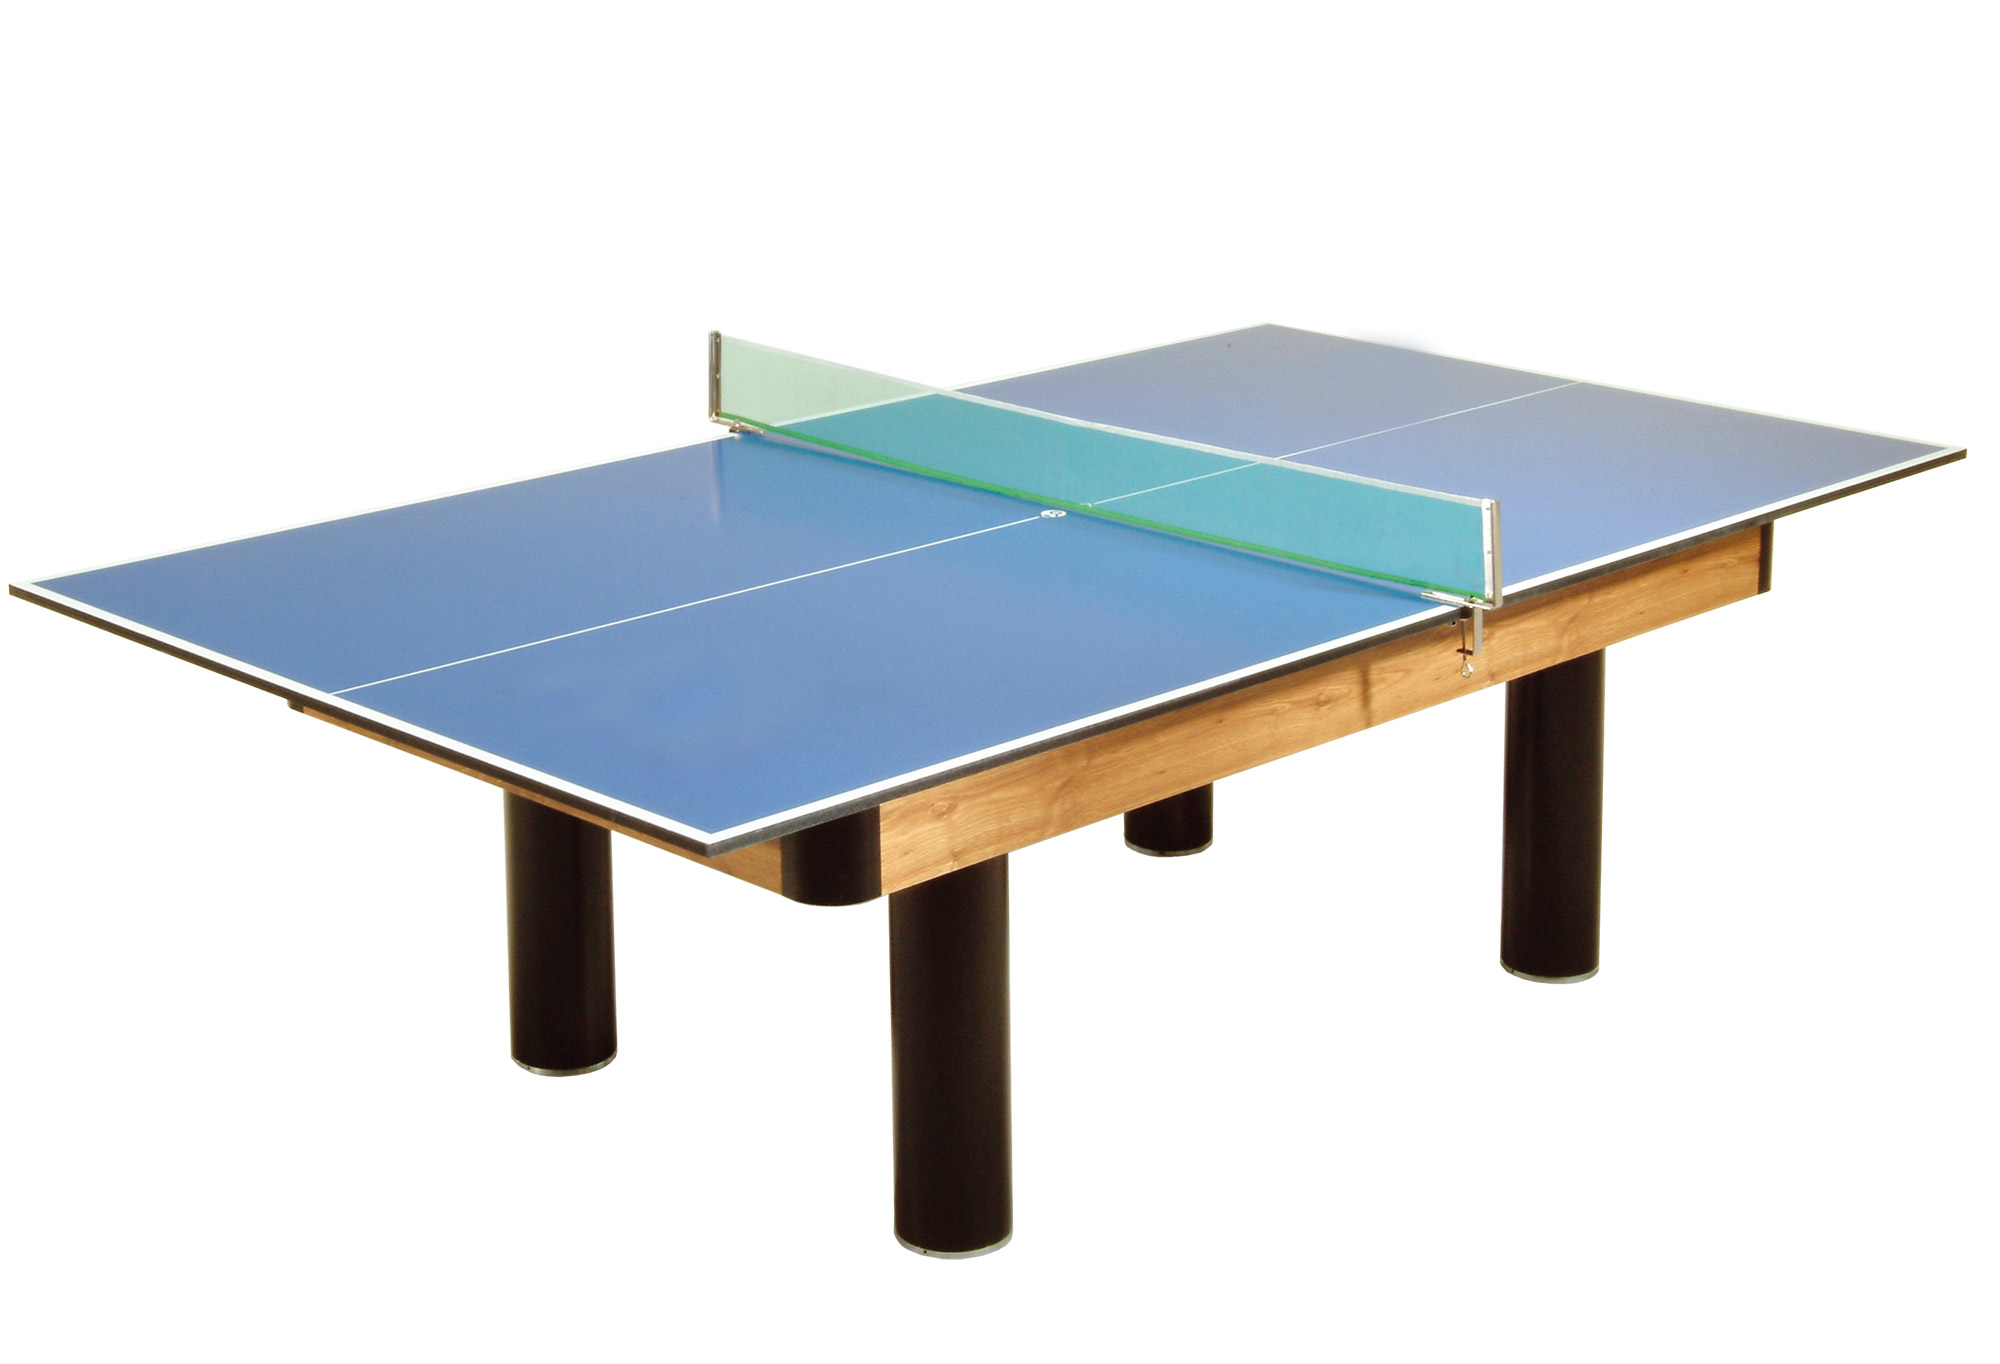 Table tennis table as support incl. net set